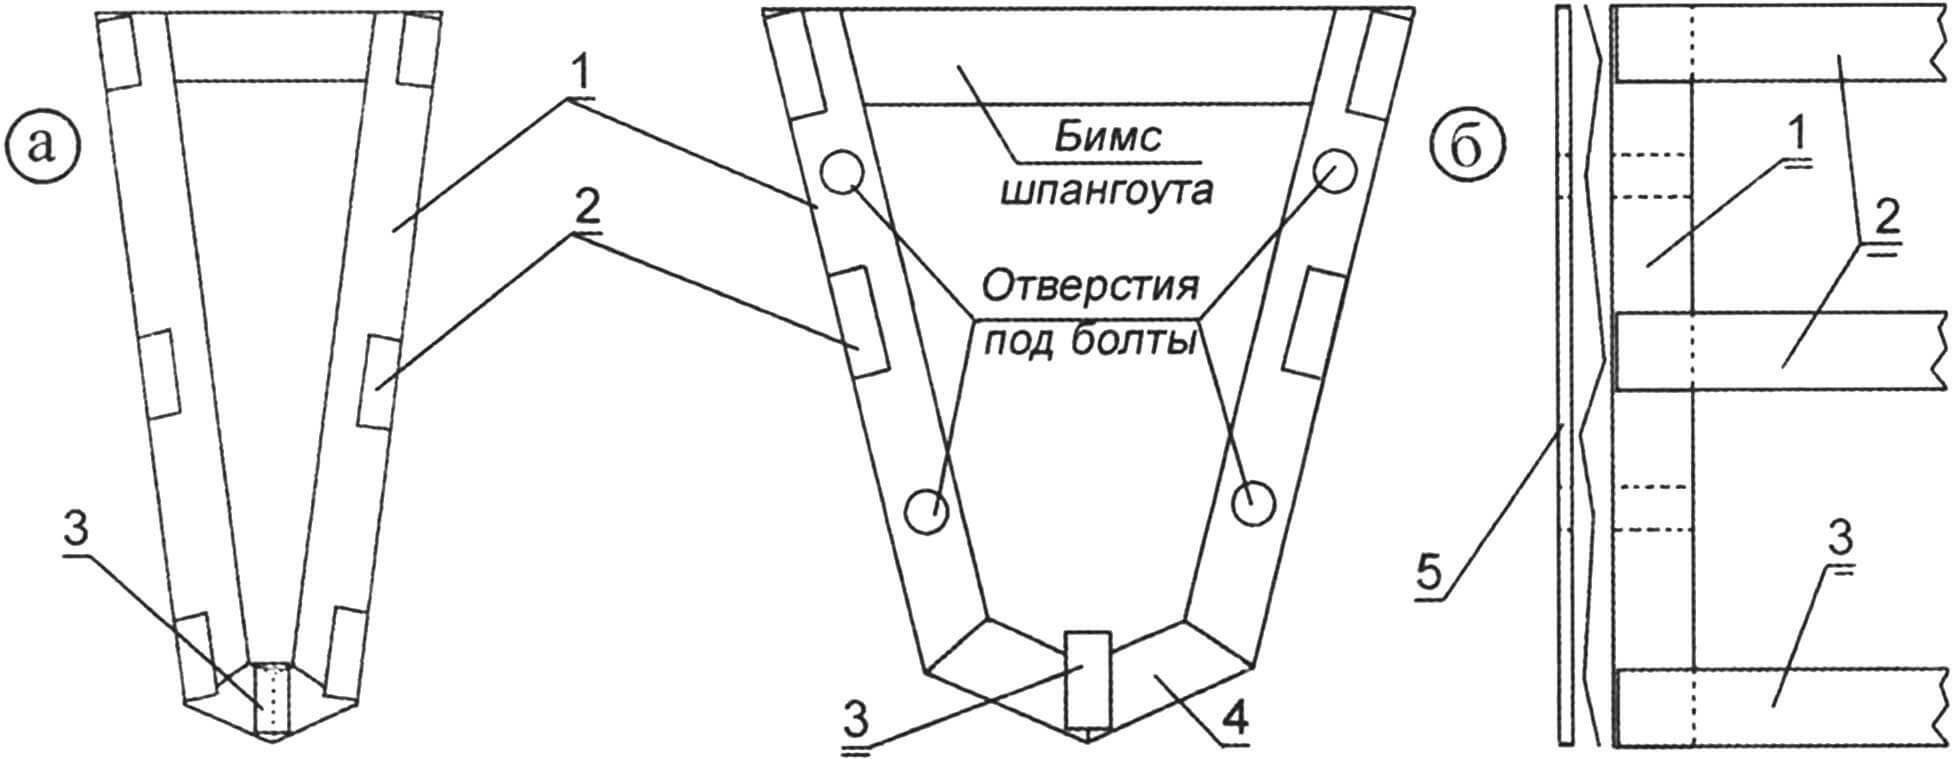 Ordinary (a) and power (b) float frames